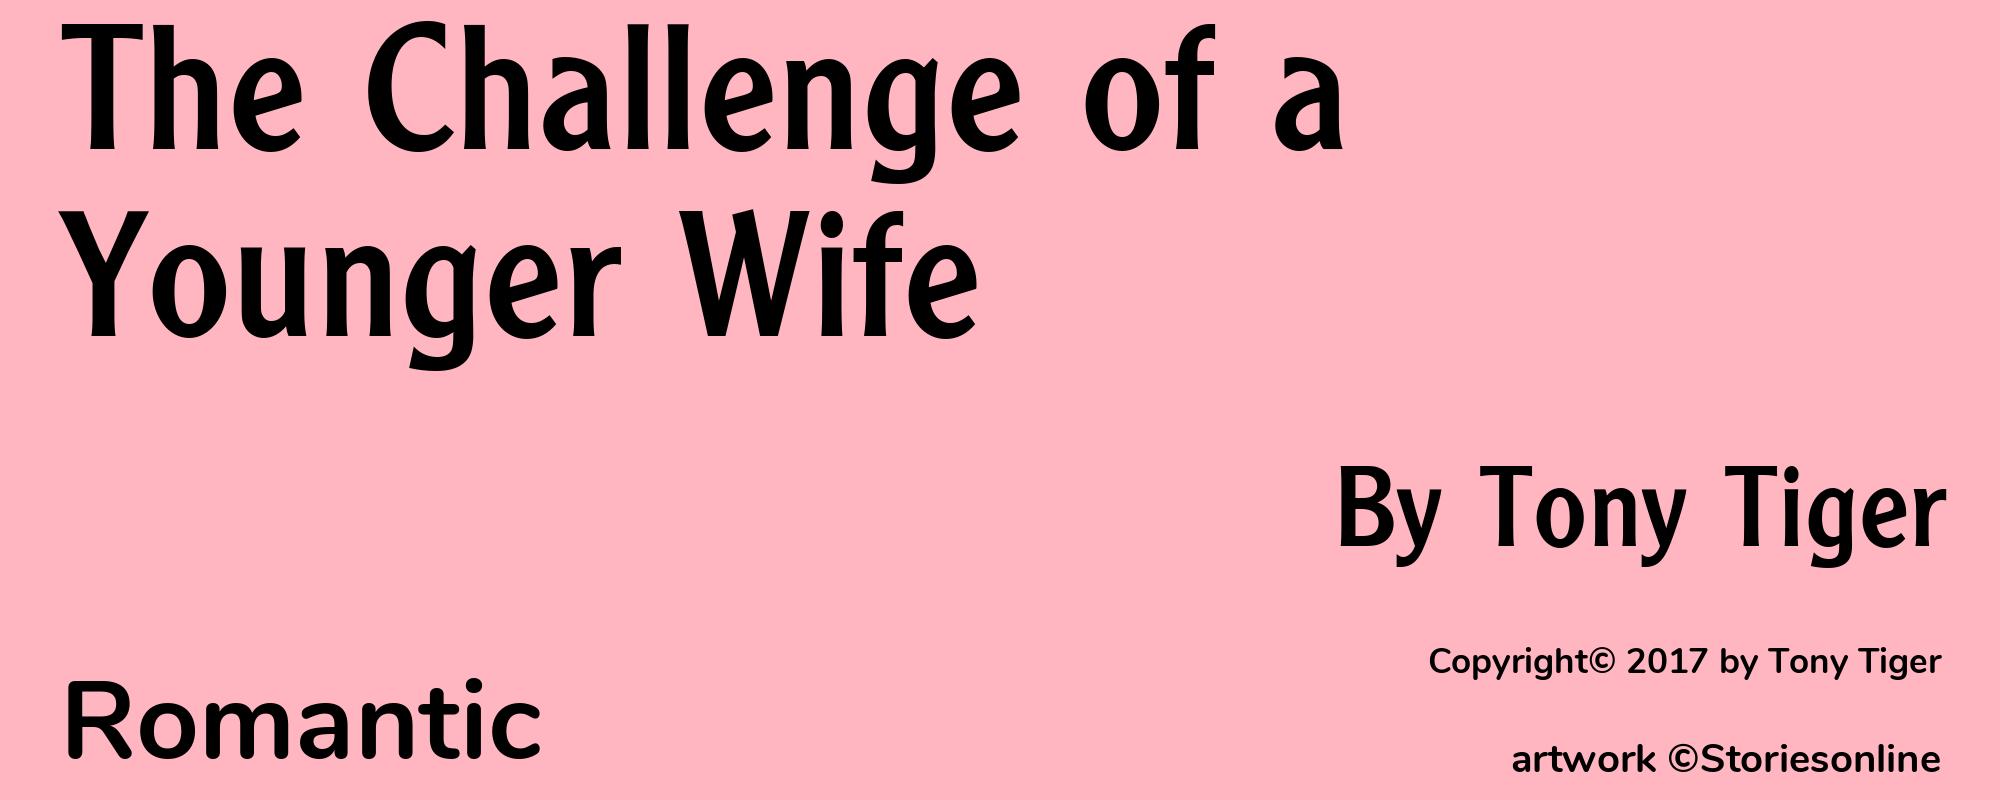 The Challenge of a Younger Wife - Cover